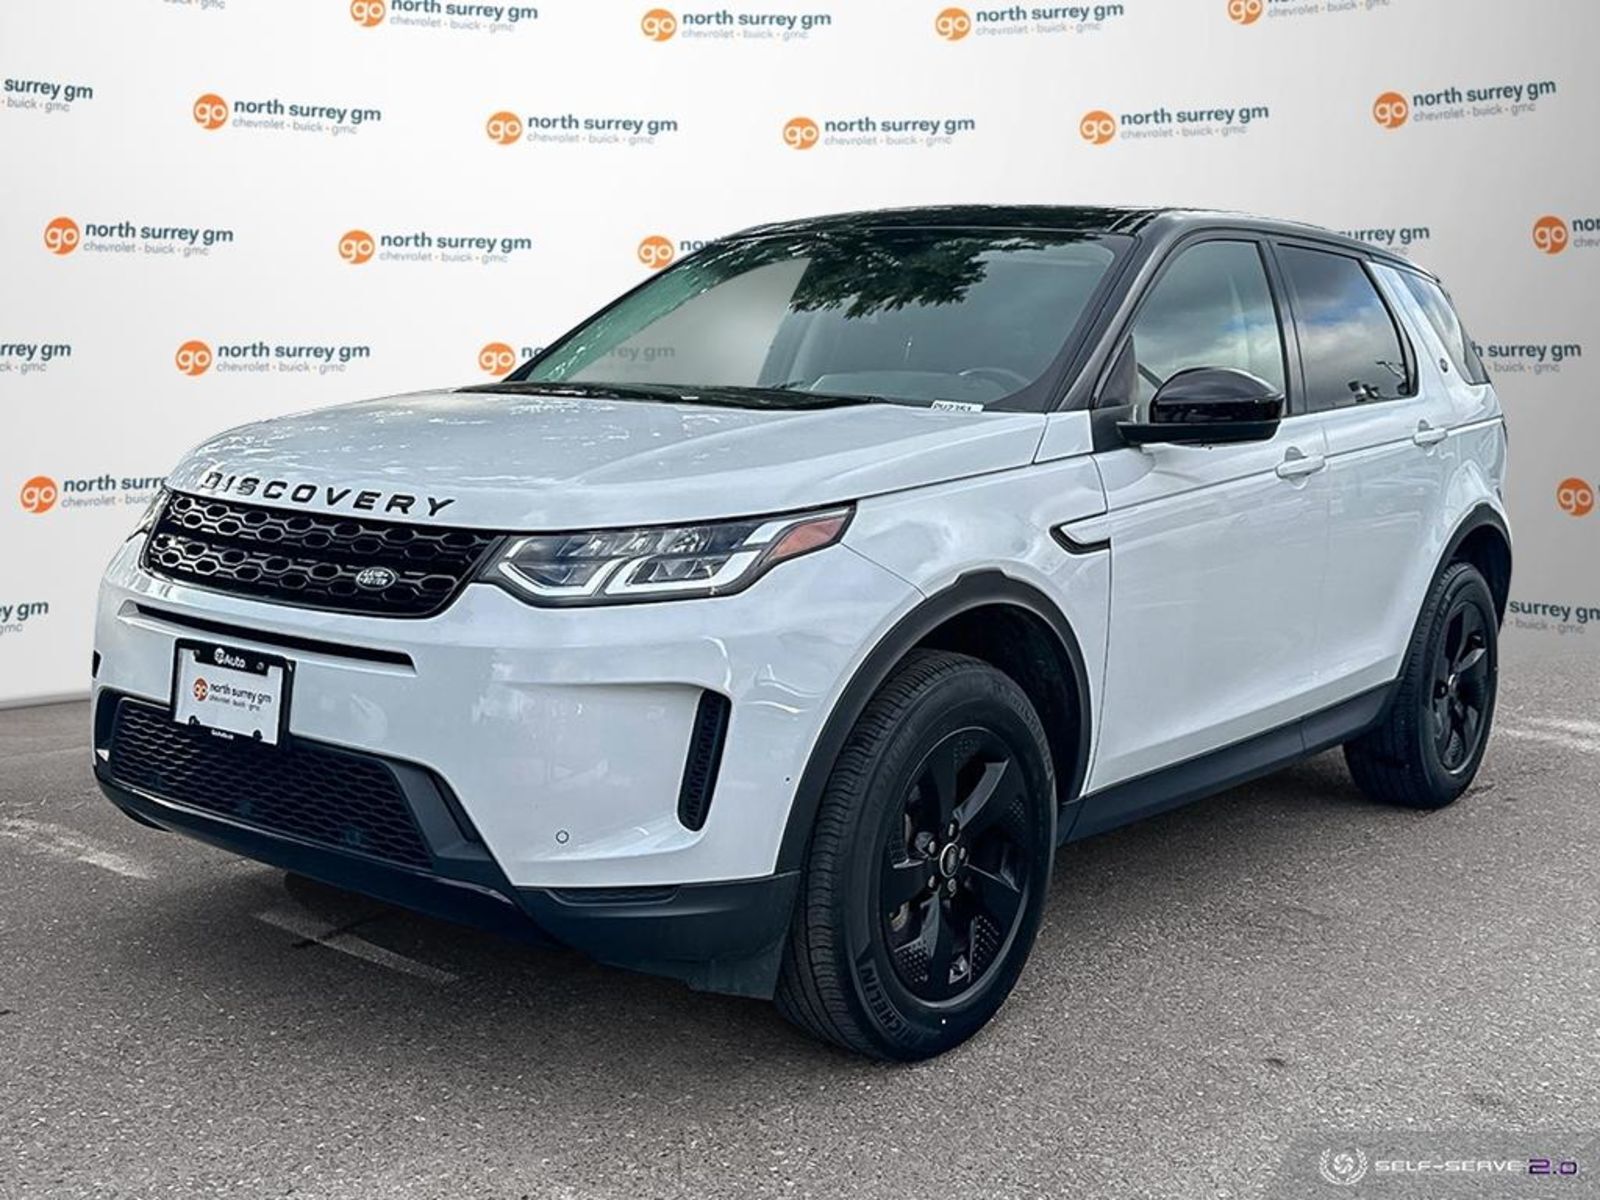 2020 Land Rover Discovery Sport S - 4WD / Leather / Navi / Rear View Cam / No Extr